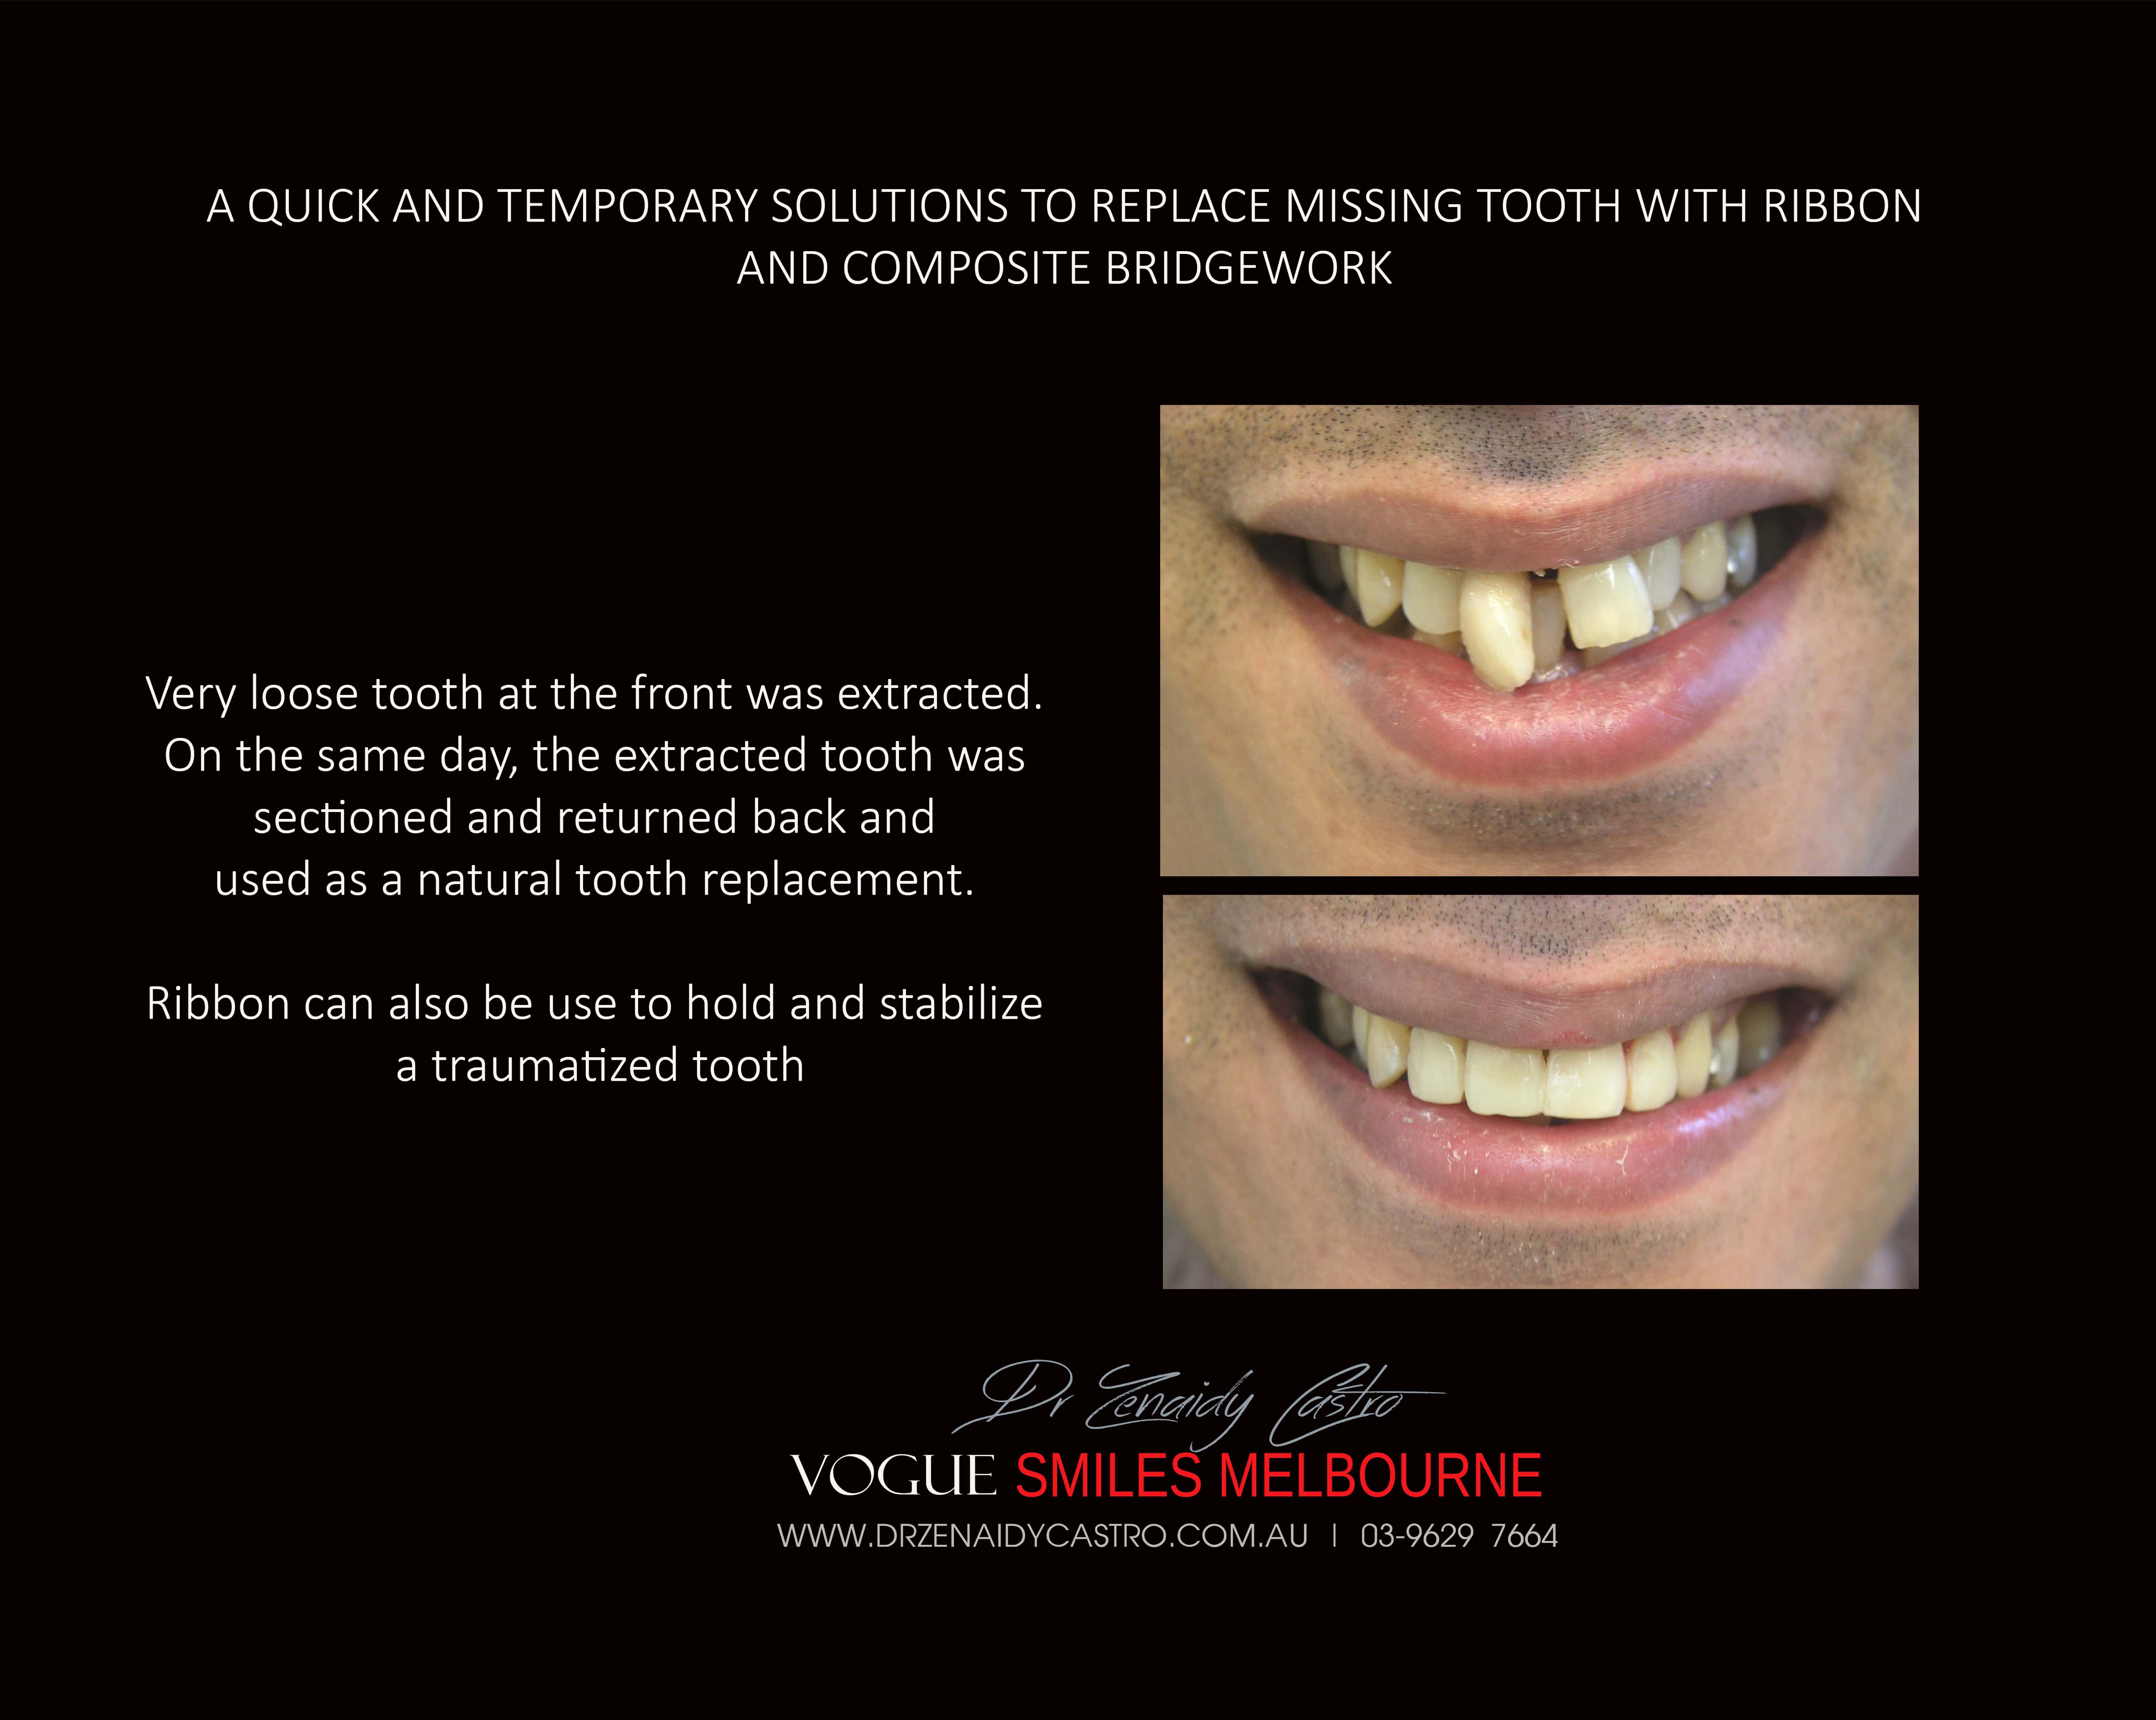 TRANSITIONAL SMILE MAKEOVER Melbourne CBD, Intermediate Cheapest most affordable Cosmetic Dentistry option to improve smile Melbourne Victoria Australia - Cosmetic Dentist Melbourne